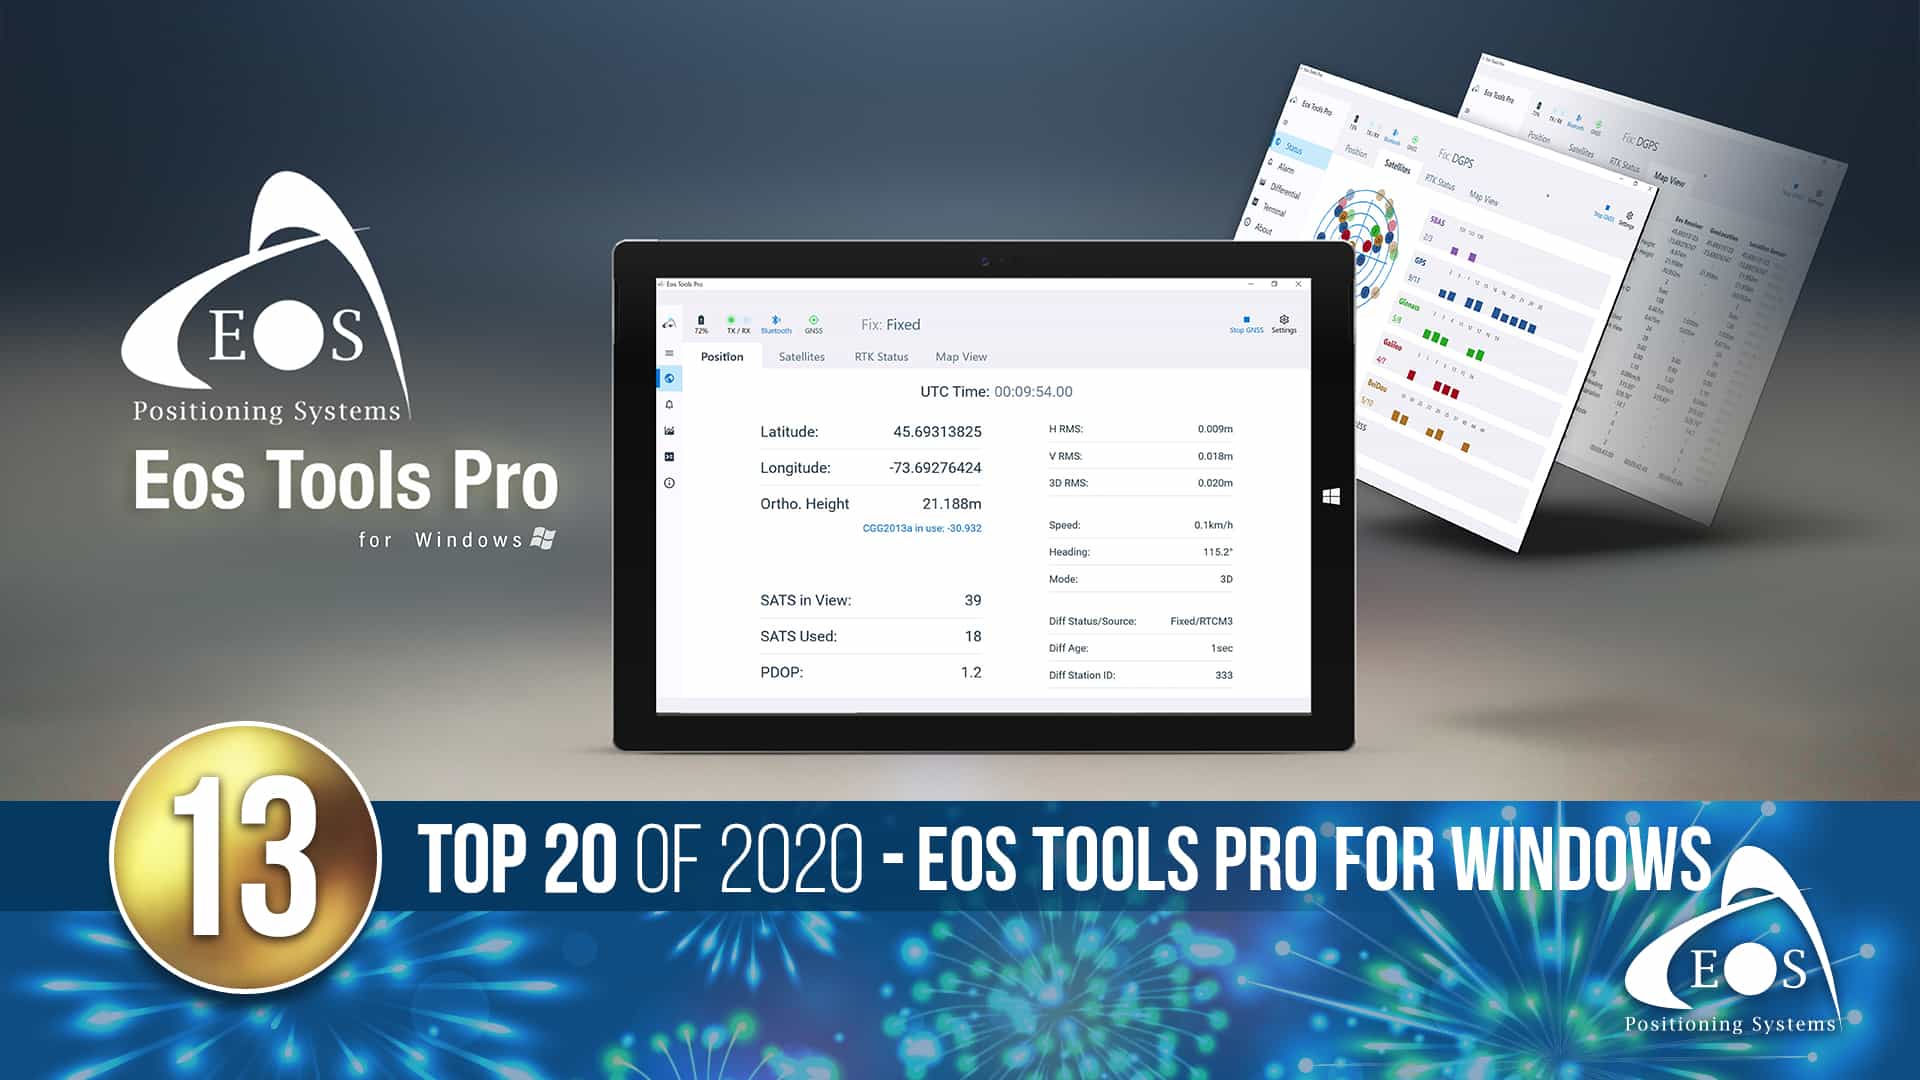 Eos Positioning Systems blog top articles of 2020: 13 - ETP for Windows